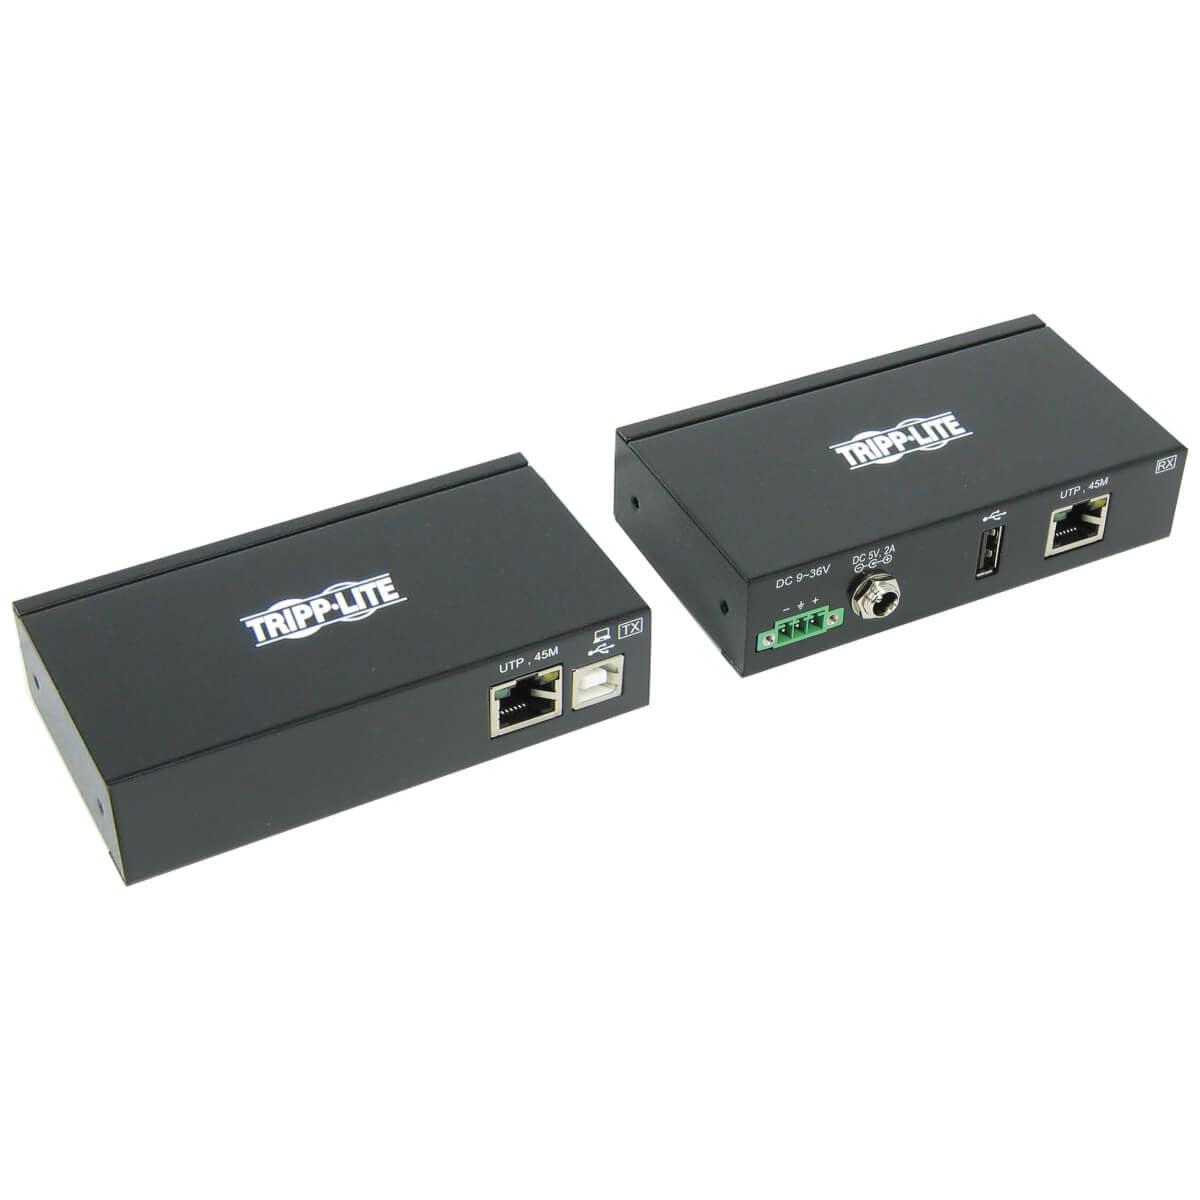 Tripp Lite B203-101-Ind 1-Port Industrial Usb Over Cat6 Extender, Esd Protection, Poc - Usb 2.0, Mountable, 150 Ft. (45.72 M), Taa